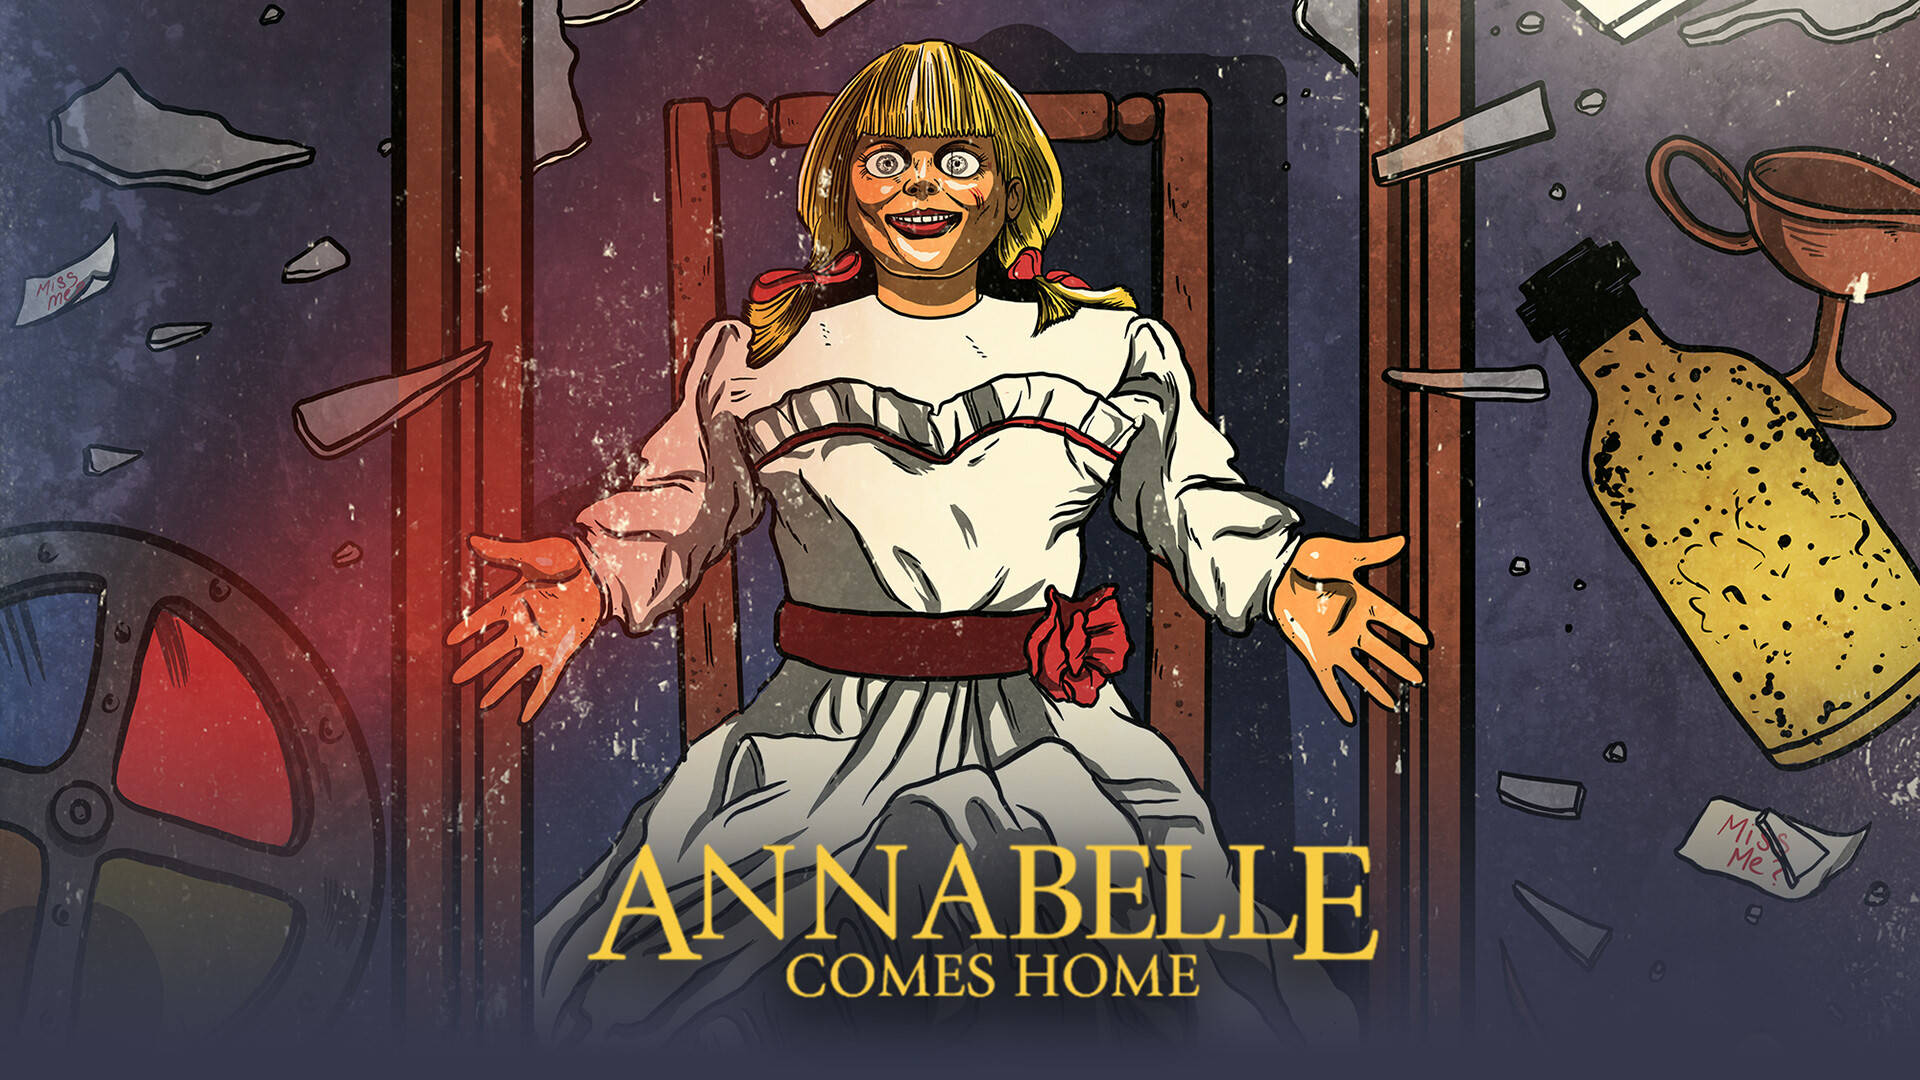 Annabelle Comes Home Cartoon Poster